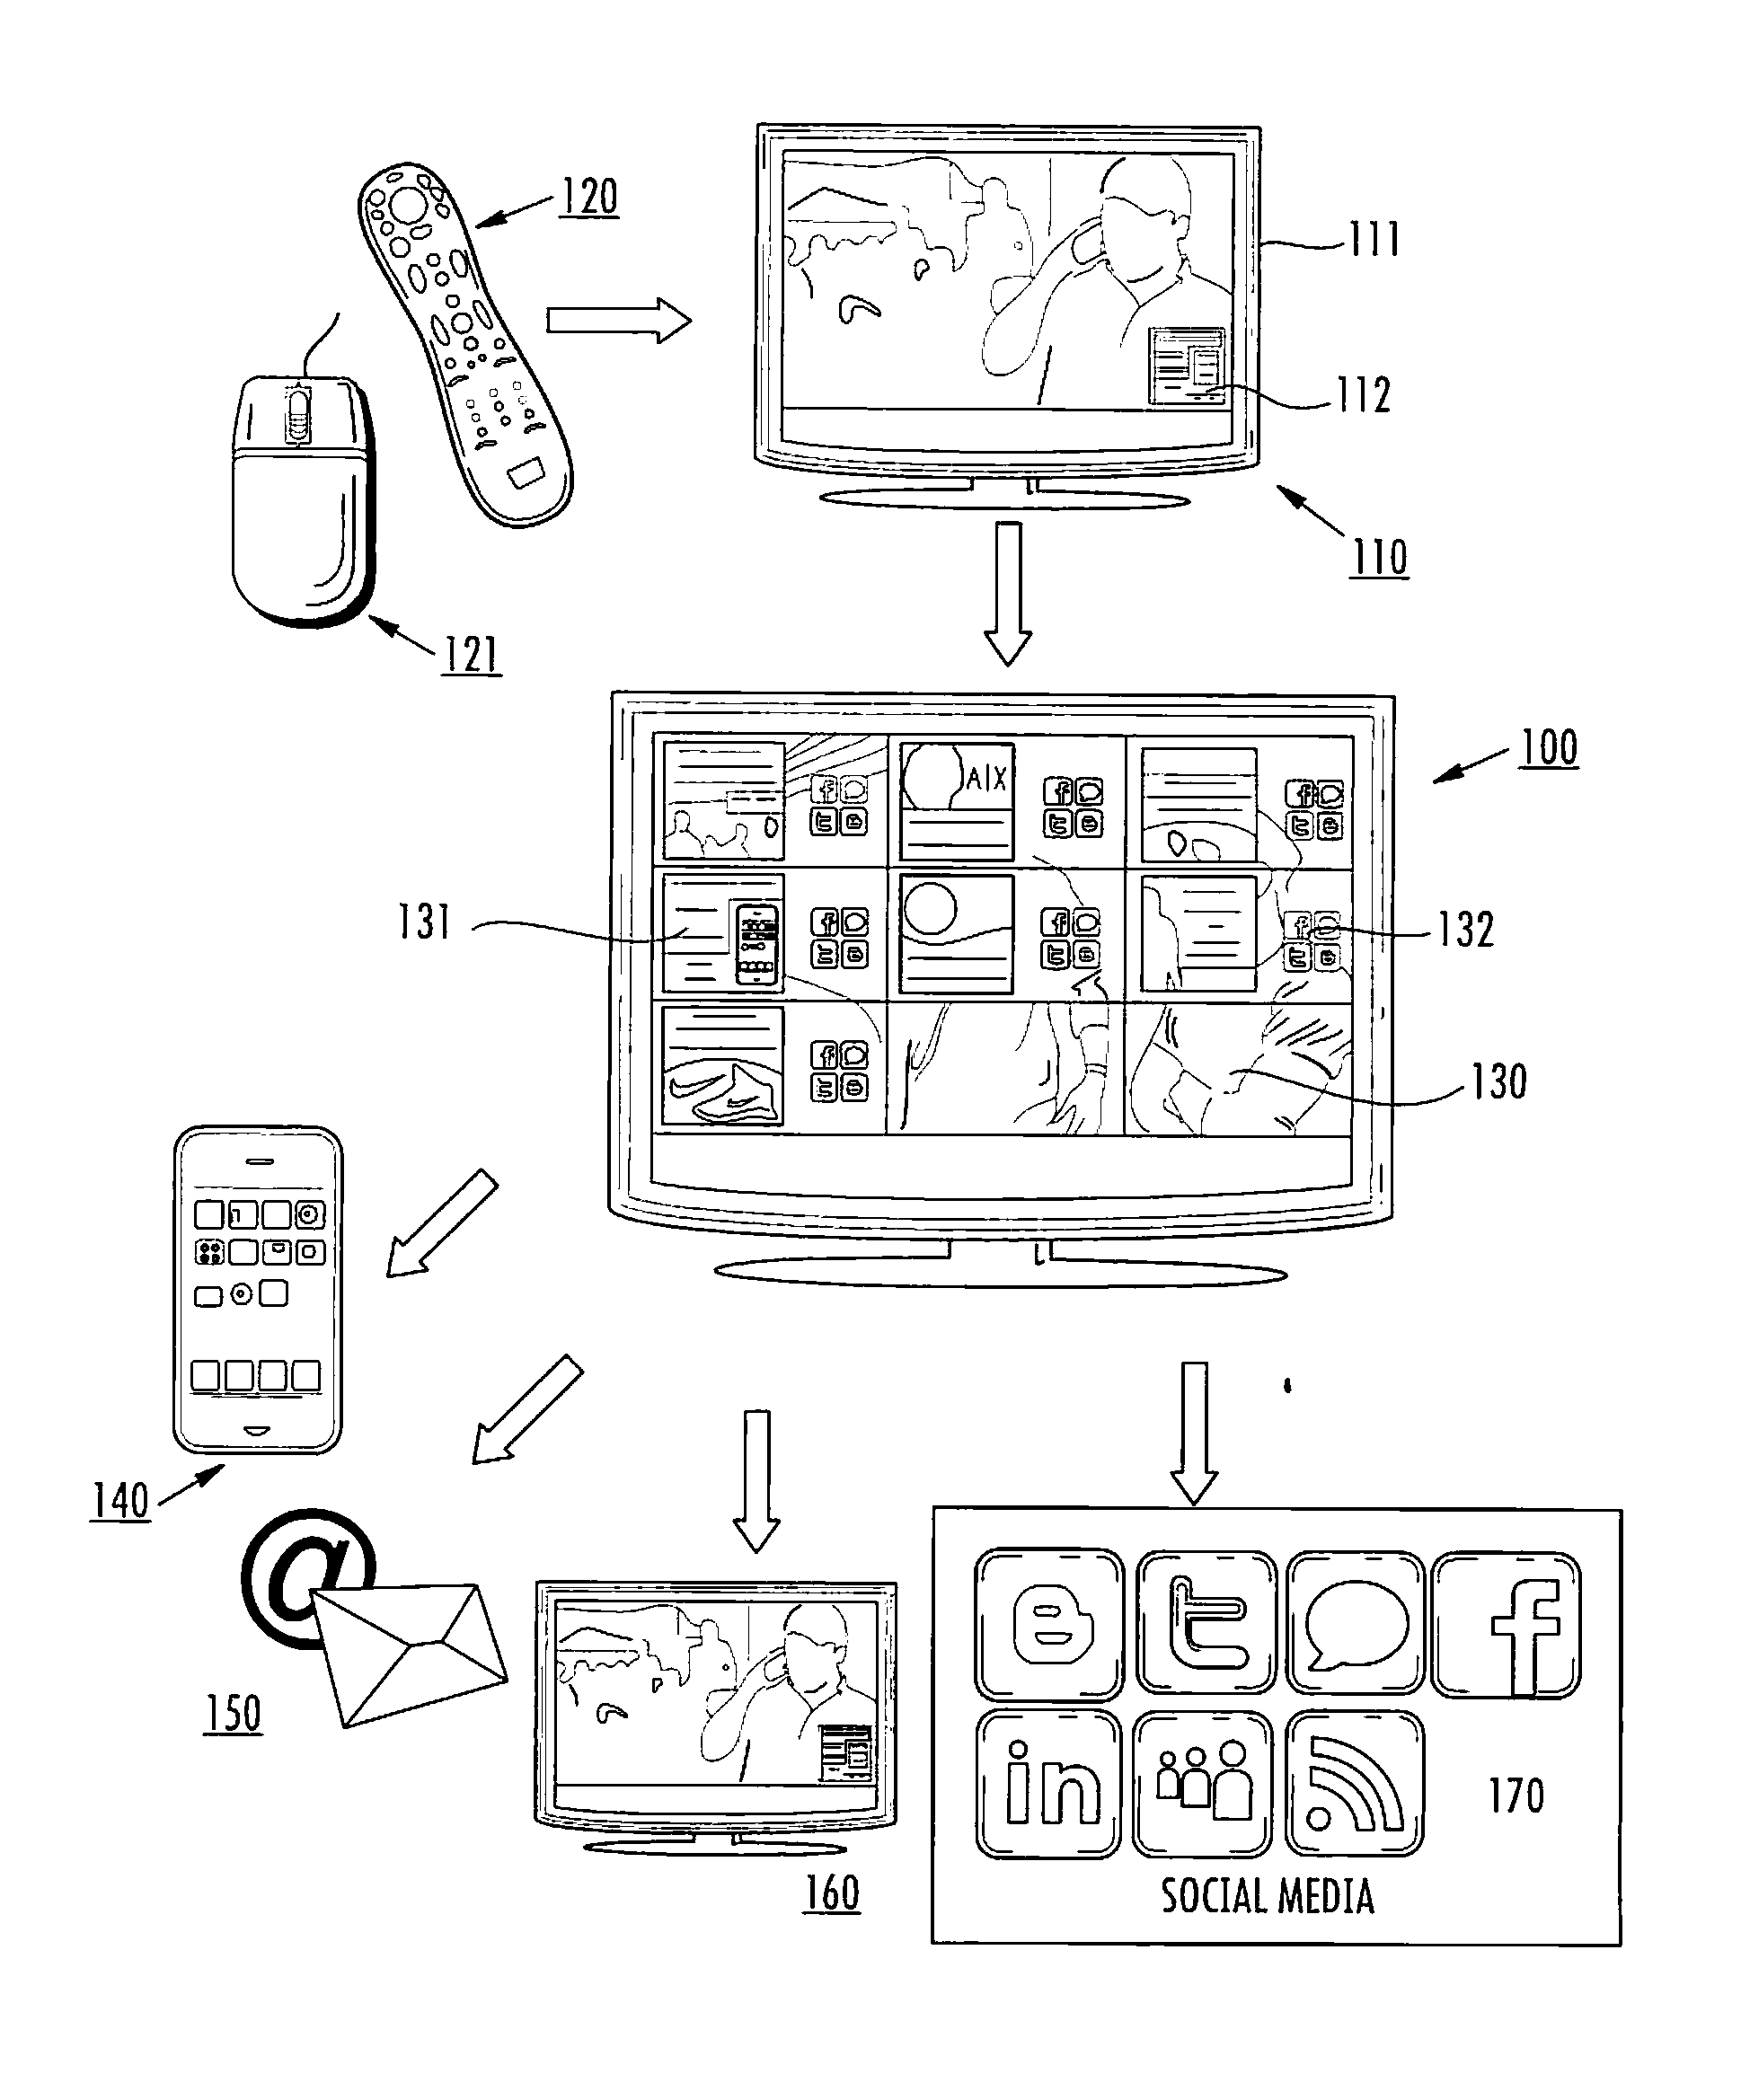 System and Method for Integrating Interactive Advertising and Metadata Into Real Time Video Content